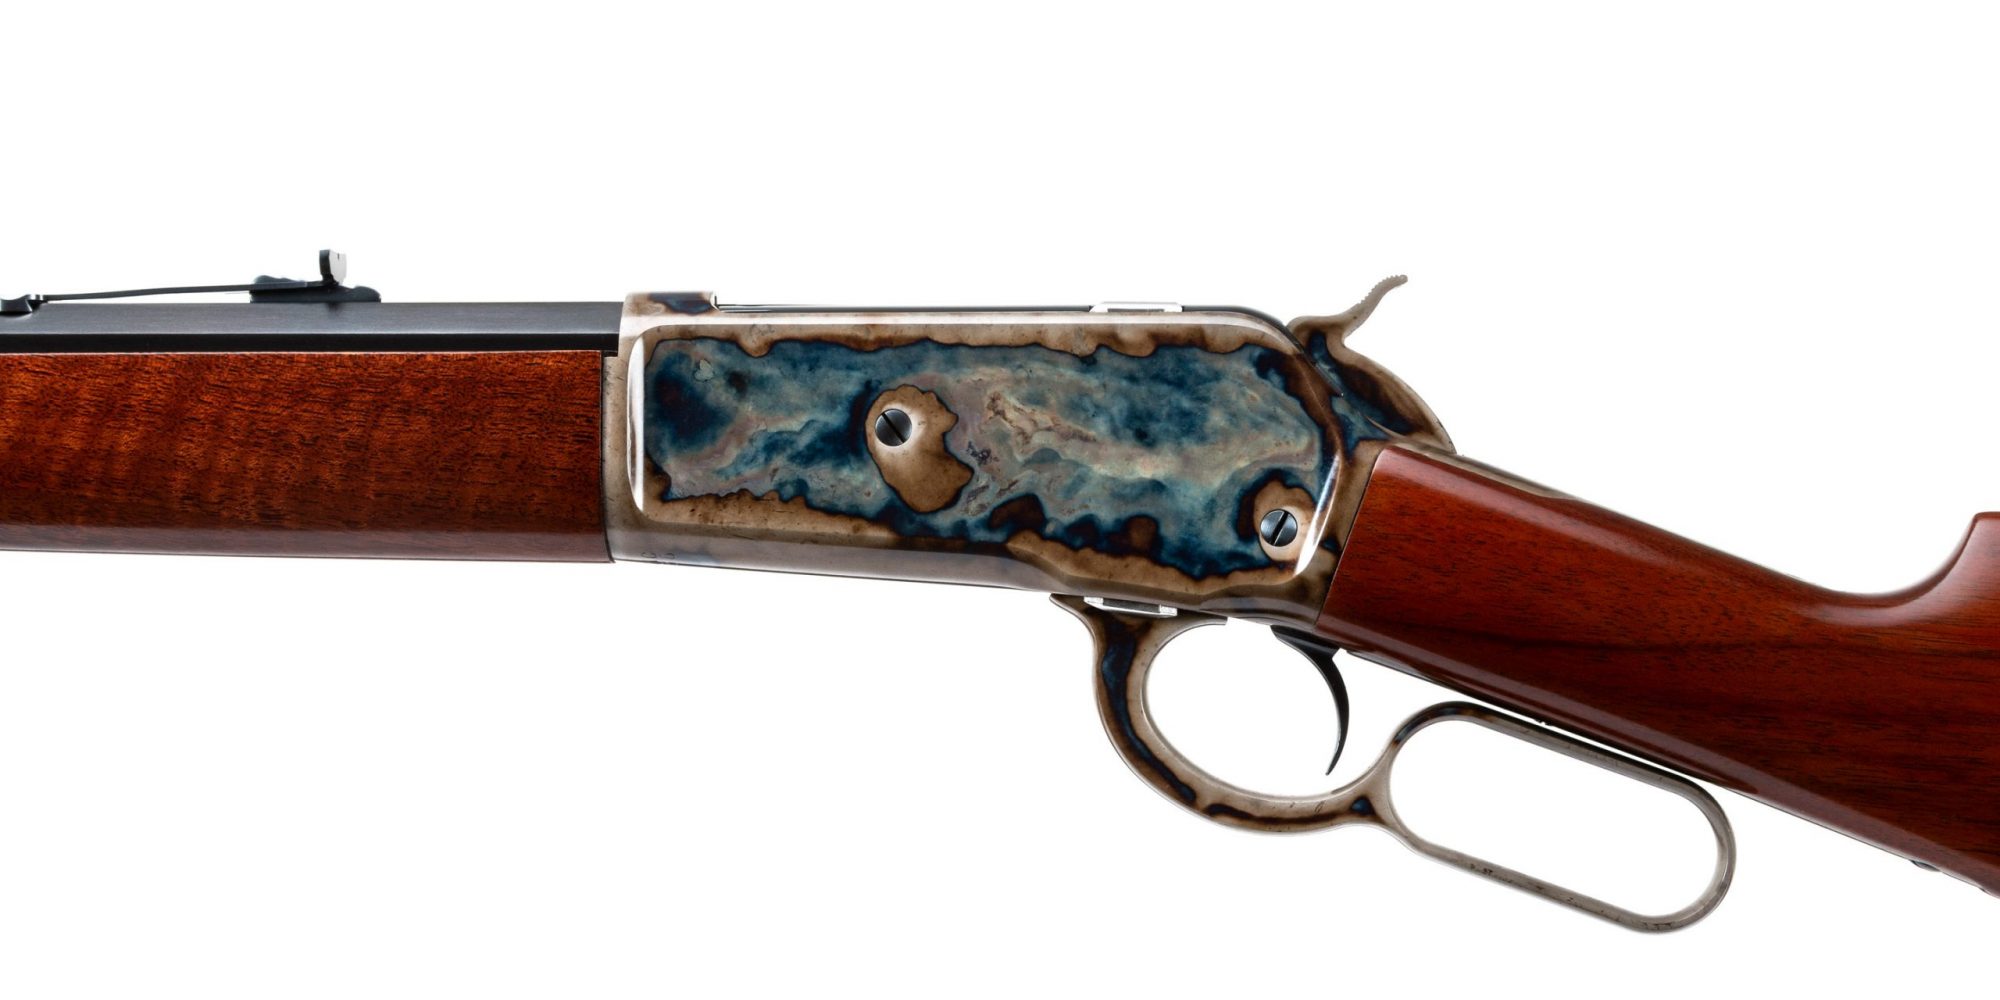 Photo of a Turnbull Model 1886 lever action rifle, featuring restoration-grade finishes like bone charcoal color case hardening, charcoal bluing and rust bluing